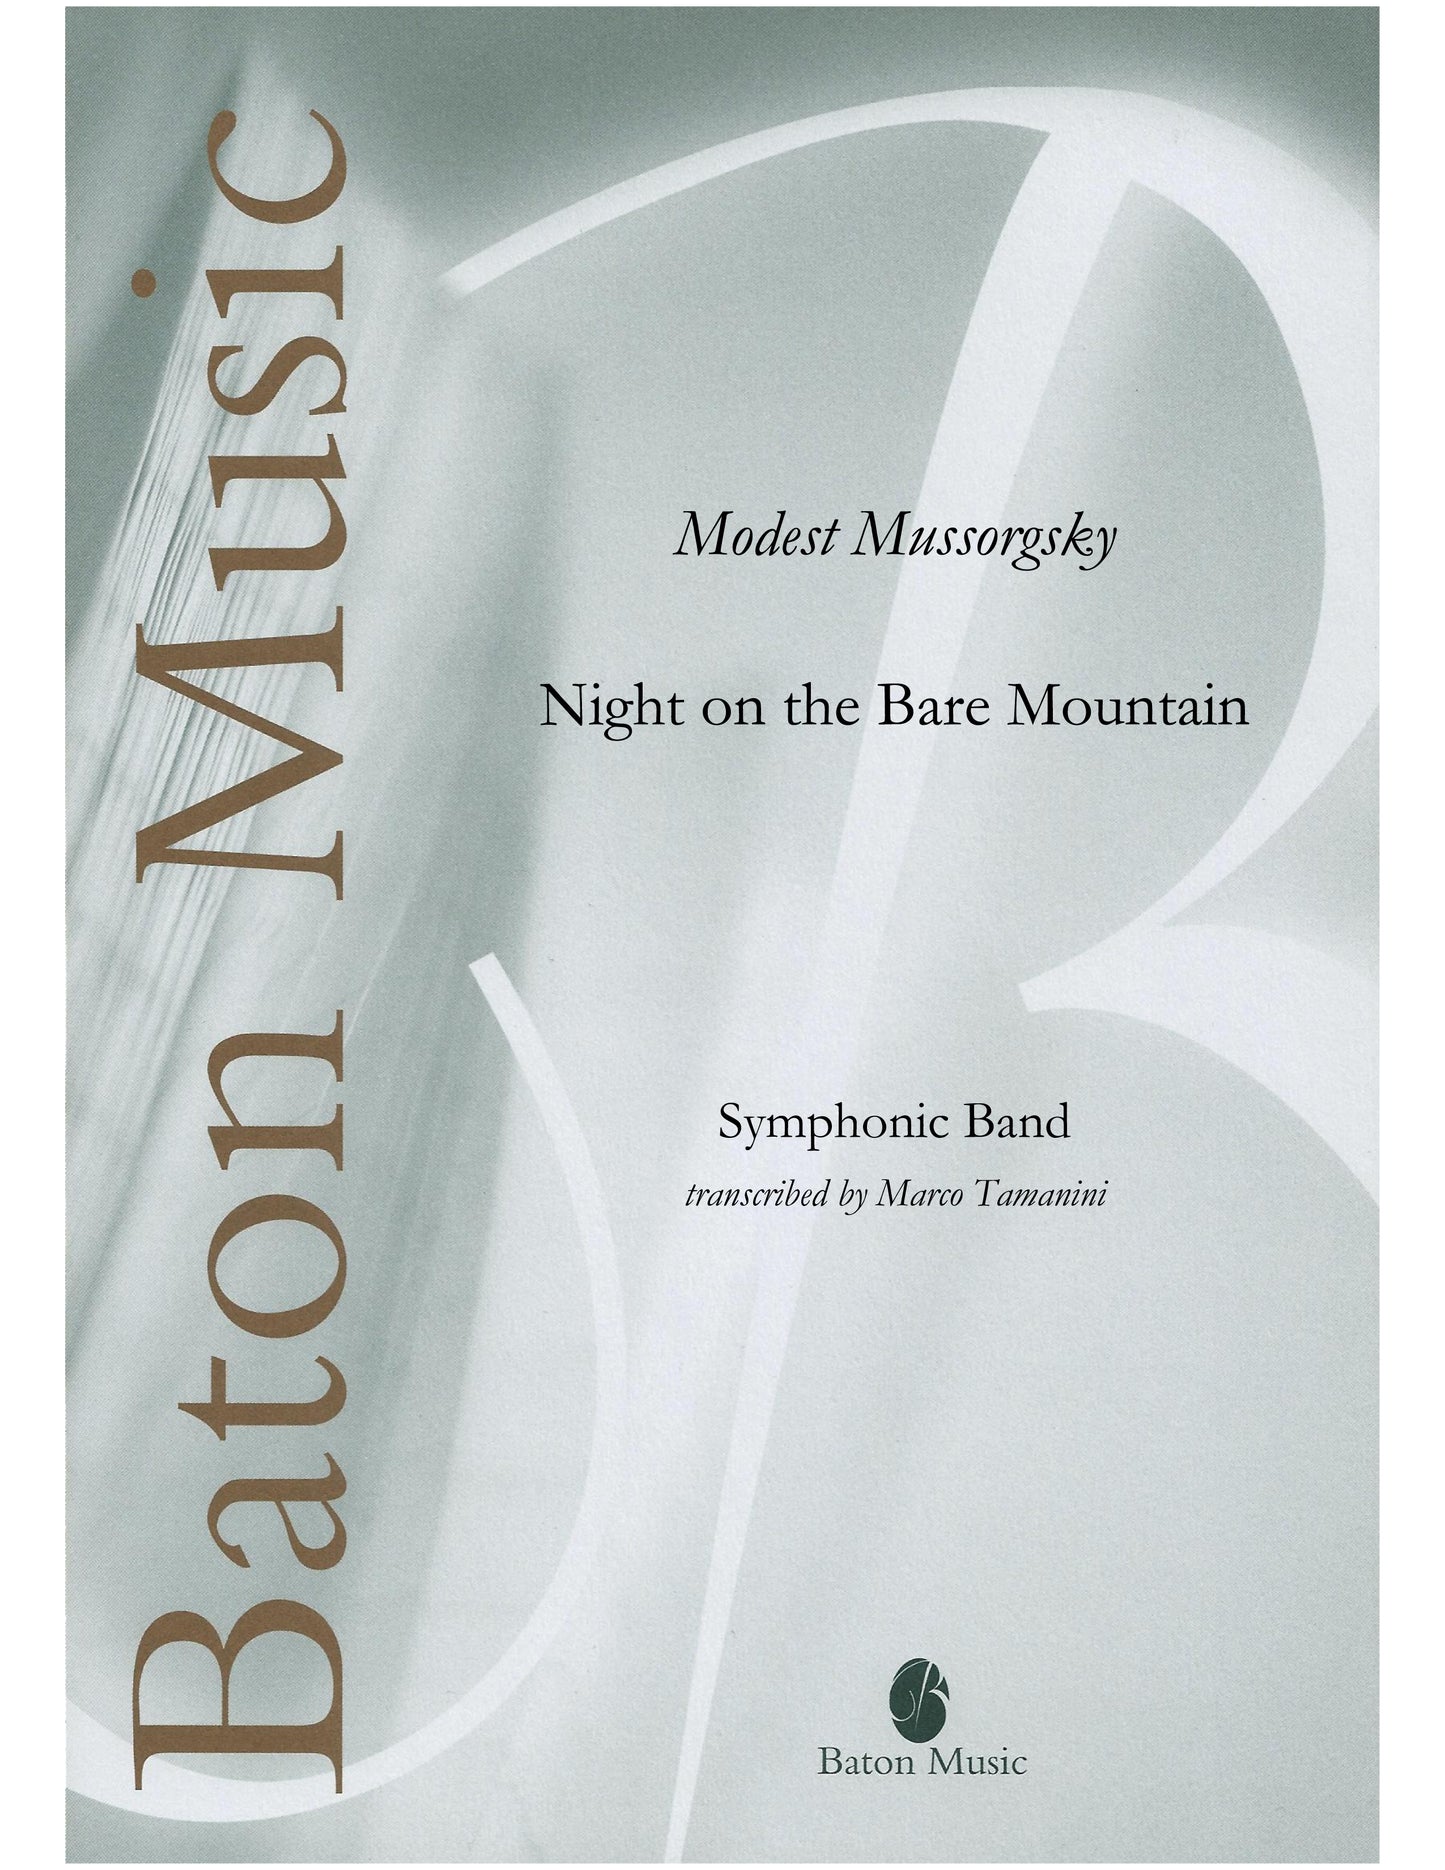 Night on the Bare Mountain - Modest Mussorgsky